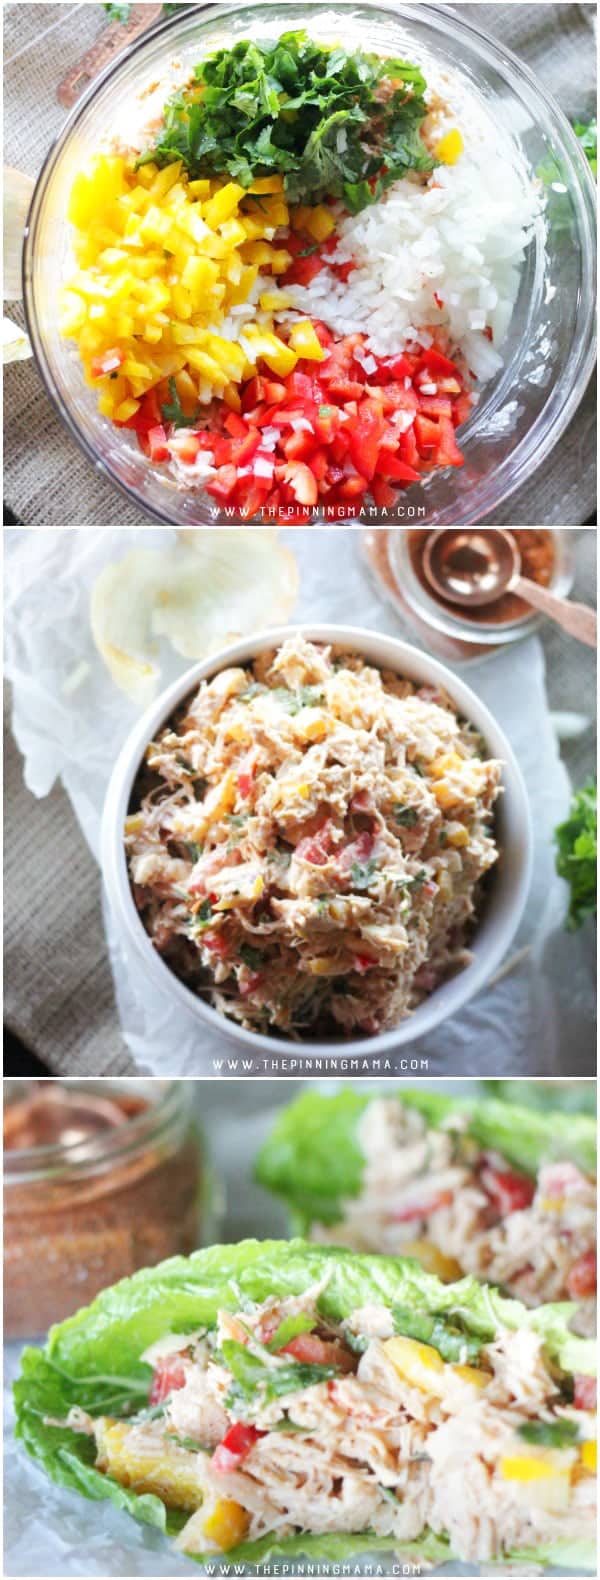 Barbecue Chicken Salad recipe - This recipe is naturally paleo, gluten free, dairy free and whole30 compliant but you will love it whether you are on a diet or not because it is absolutely DELICIOUS! It is a fast and easy recipe to make and is the perfect lunch or summer dish.